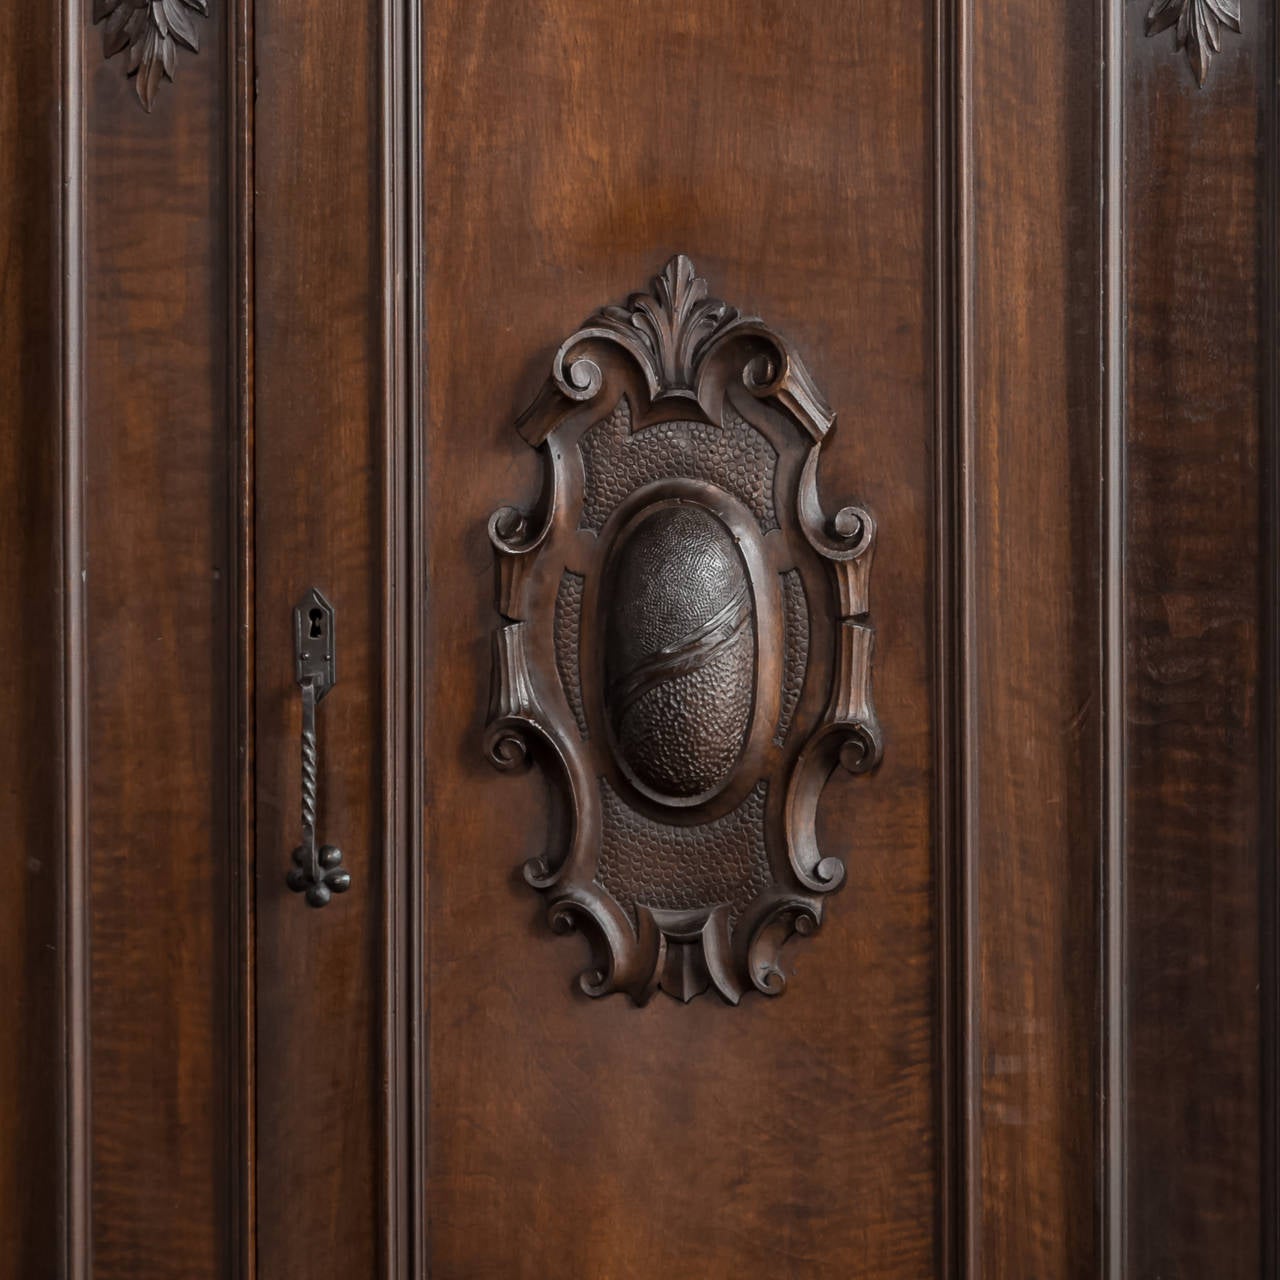 Benchmade from fine Italian walnut and hand-carved with a glorious expression of Renaissance-inspired embellishment in full relief, this triple armoire will provide copious amounts of stylish storage. Heraldic crests centered on the door panels are